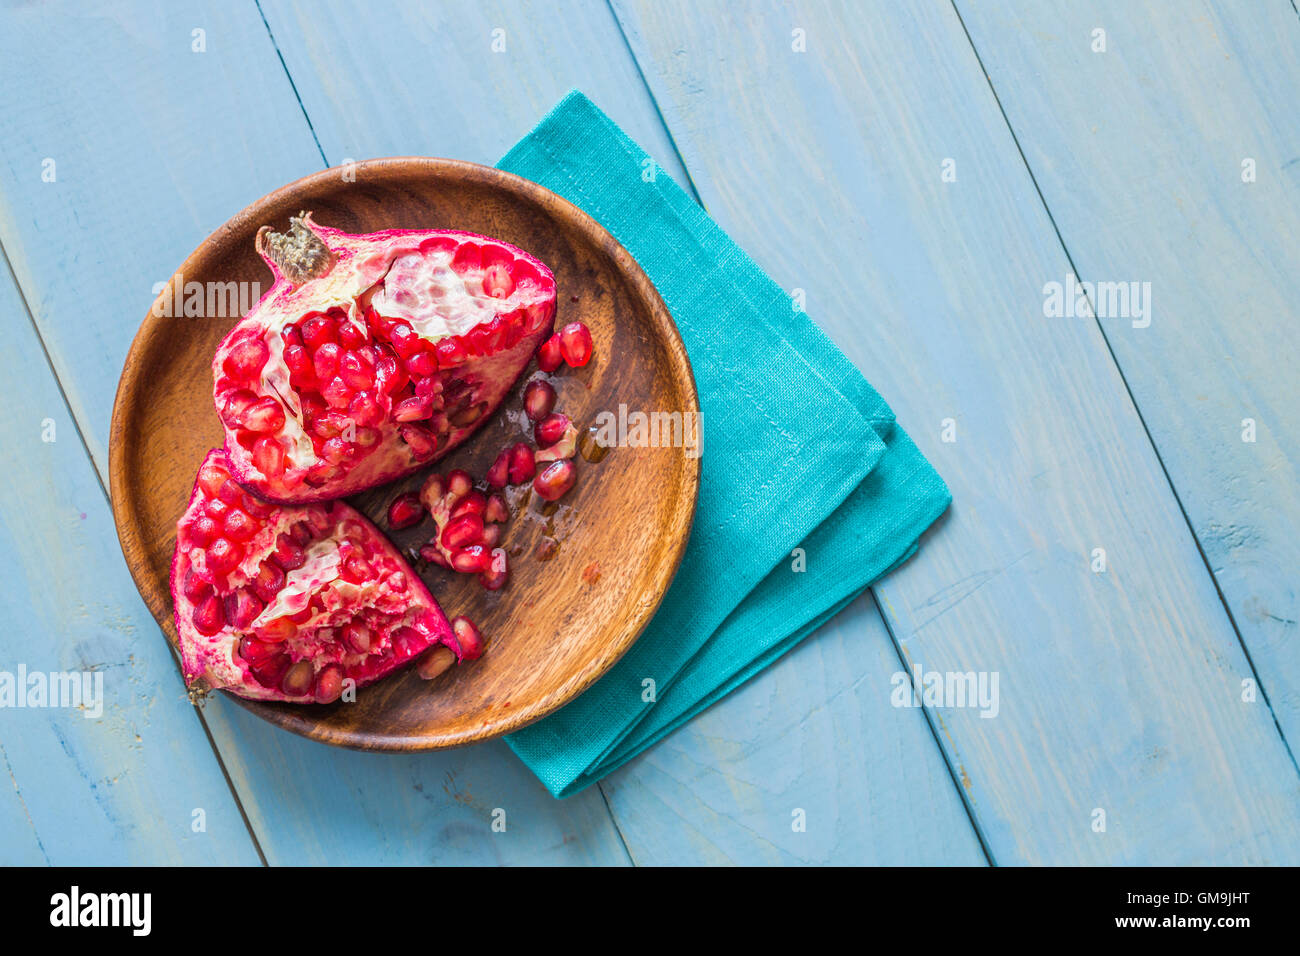 Overhead view of halved pomegranate on wooden plate Stock Photo